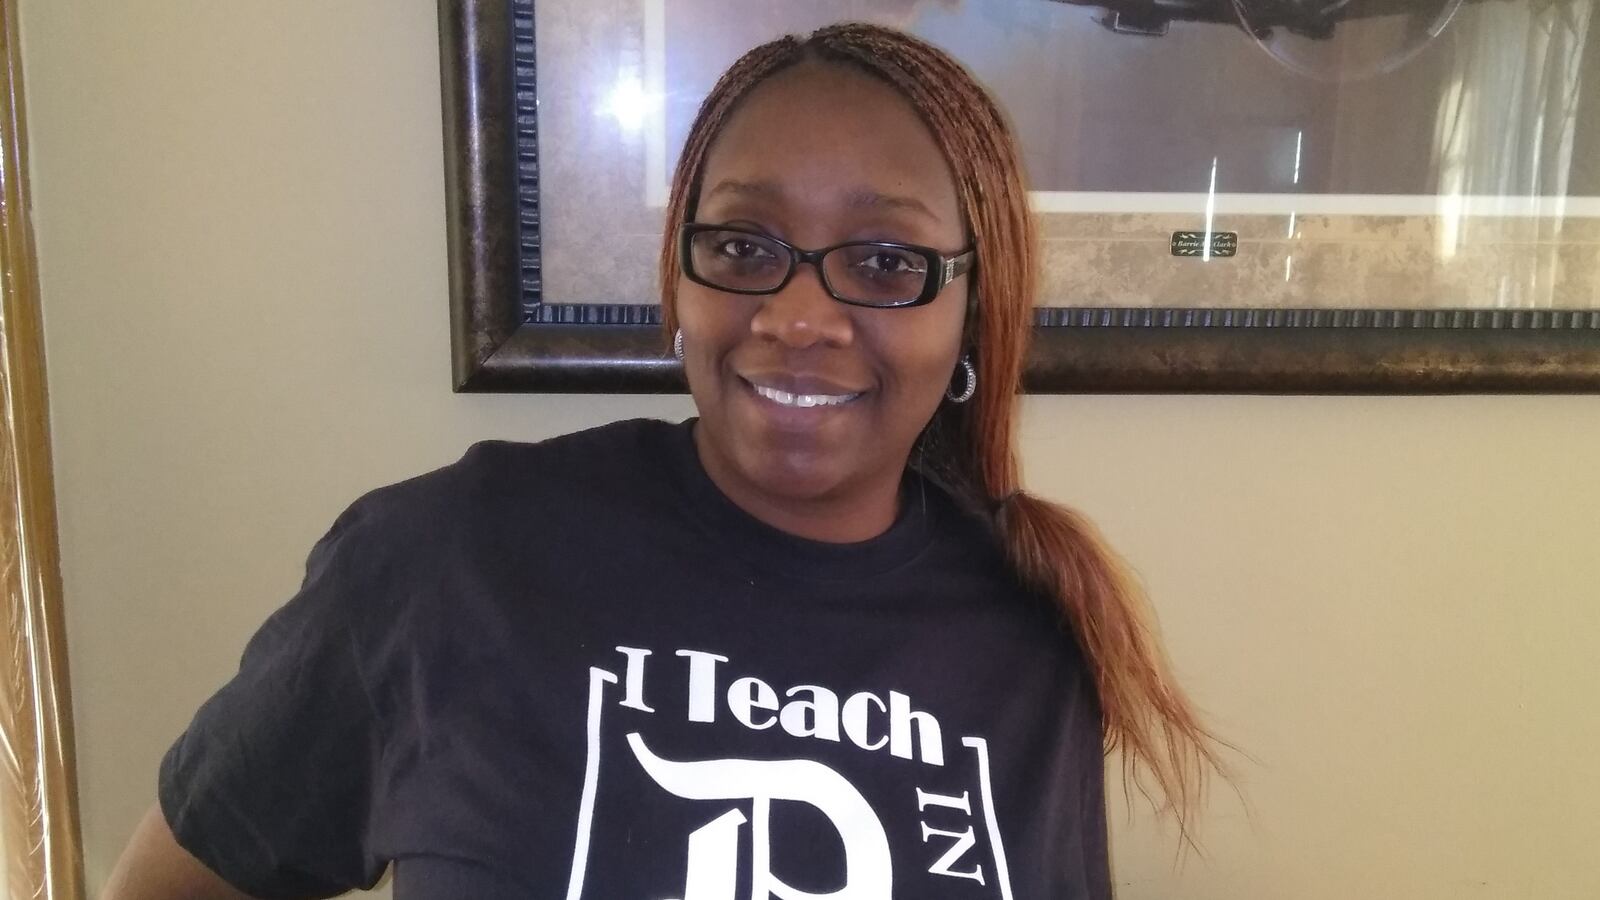 Dawn McFarlin, shown here wearing a shirt from her T-shirt company, is one of many Michigan teachers with a second job.